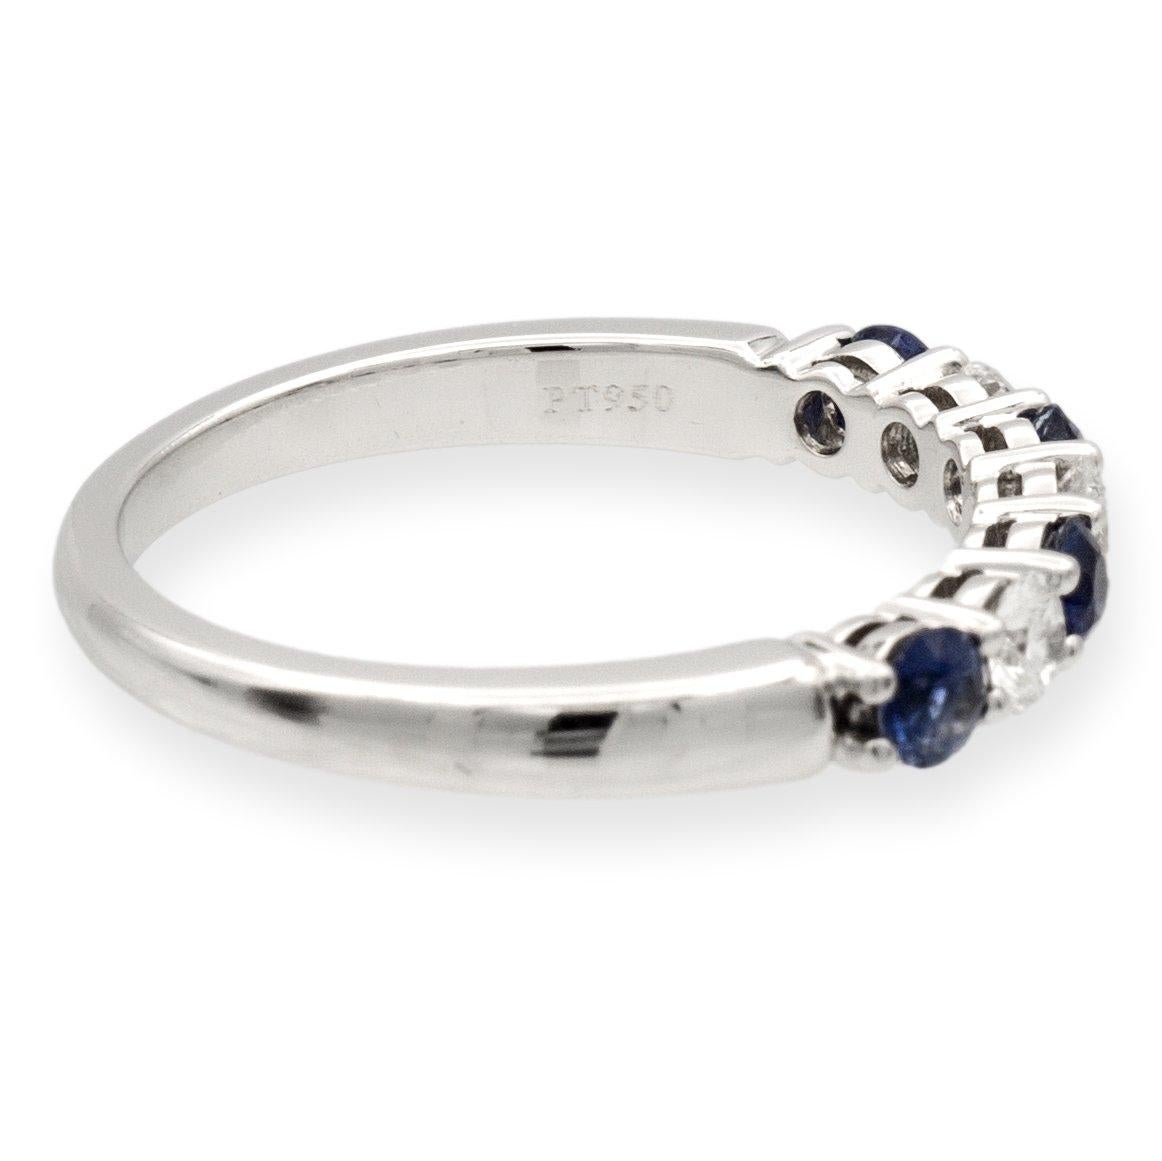 Tiffany & Co. Forever Half Band ring finely crafted in platinum featuring 7 Round Brilliant cut diamonds set in shared prongs weighing .24 carats total weight interlocking with round sapphires weighing a total of .40 carats in a deep blue color. The